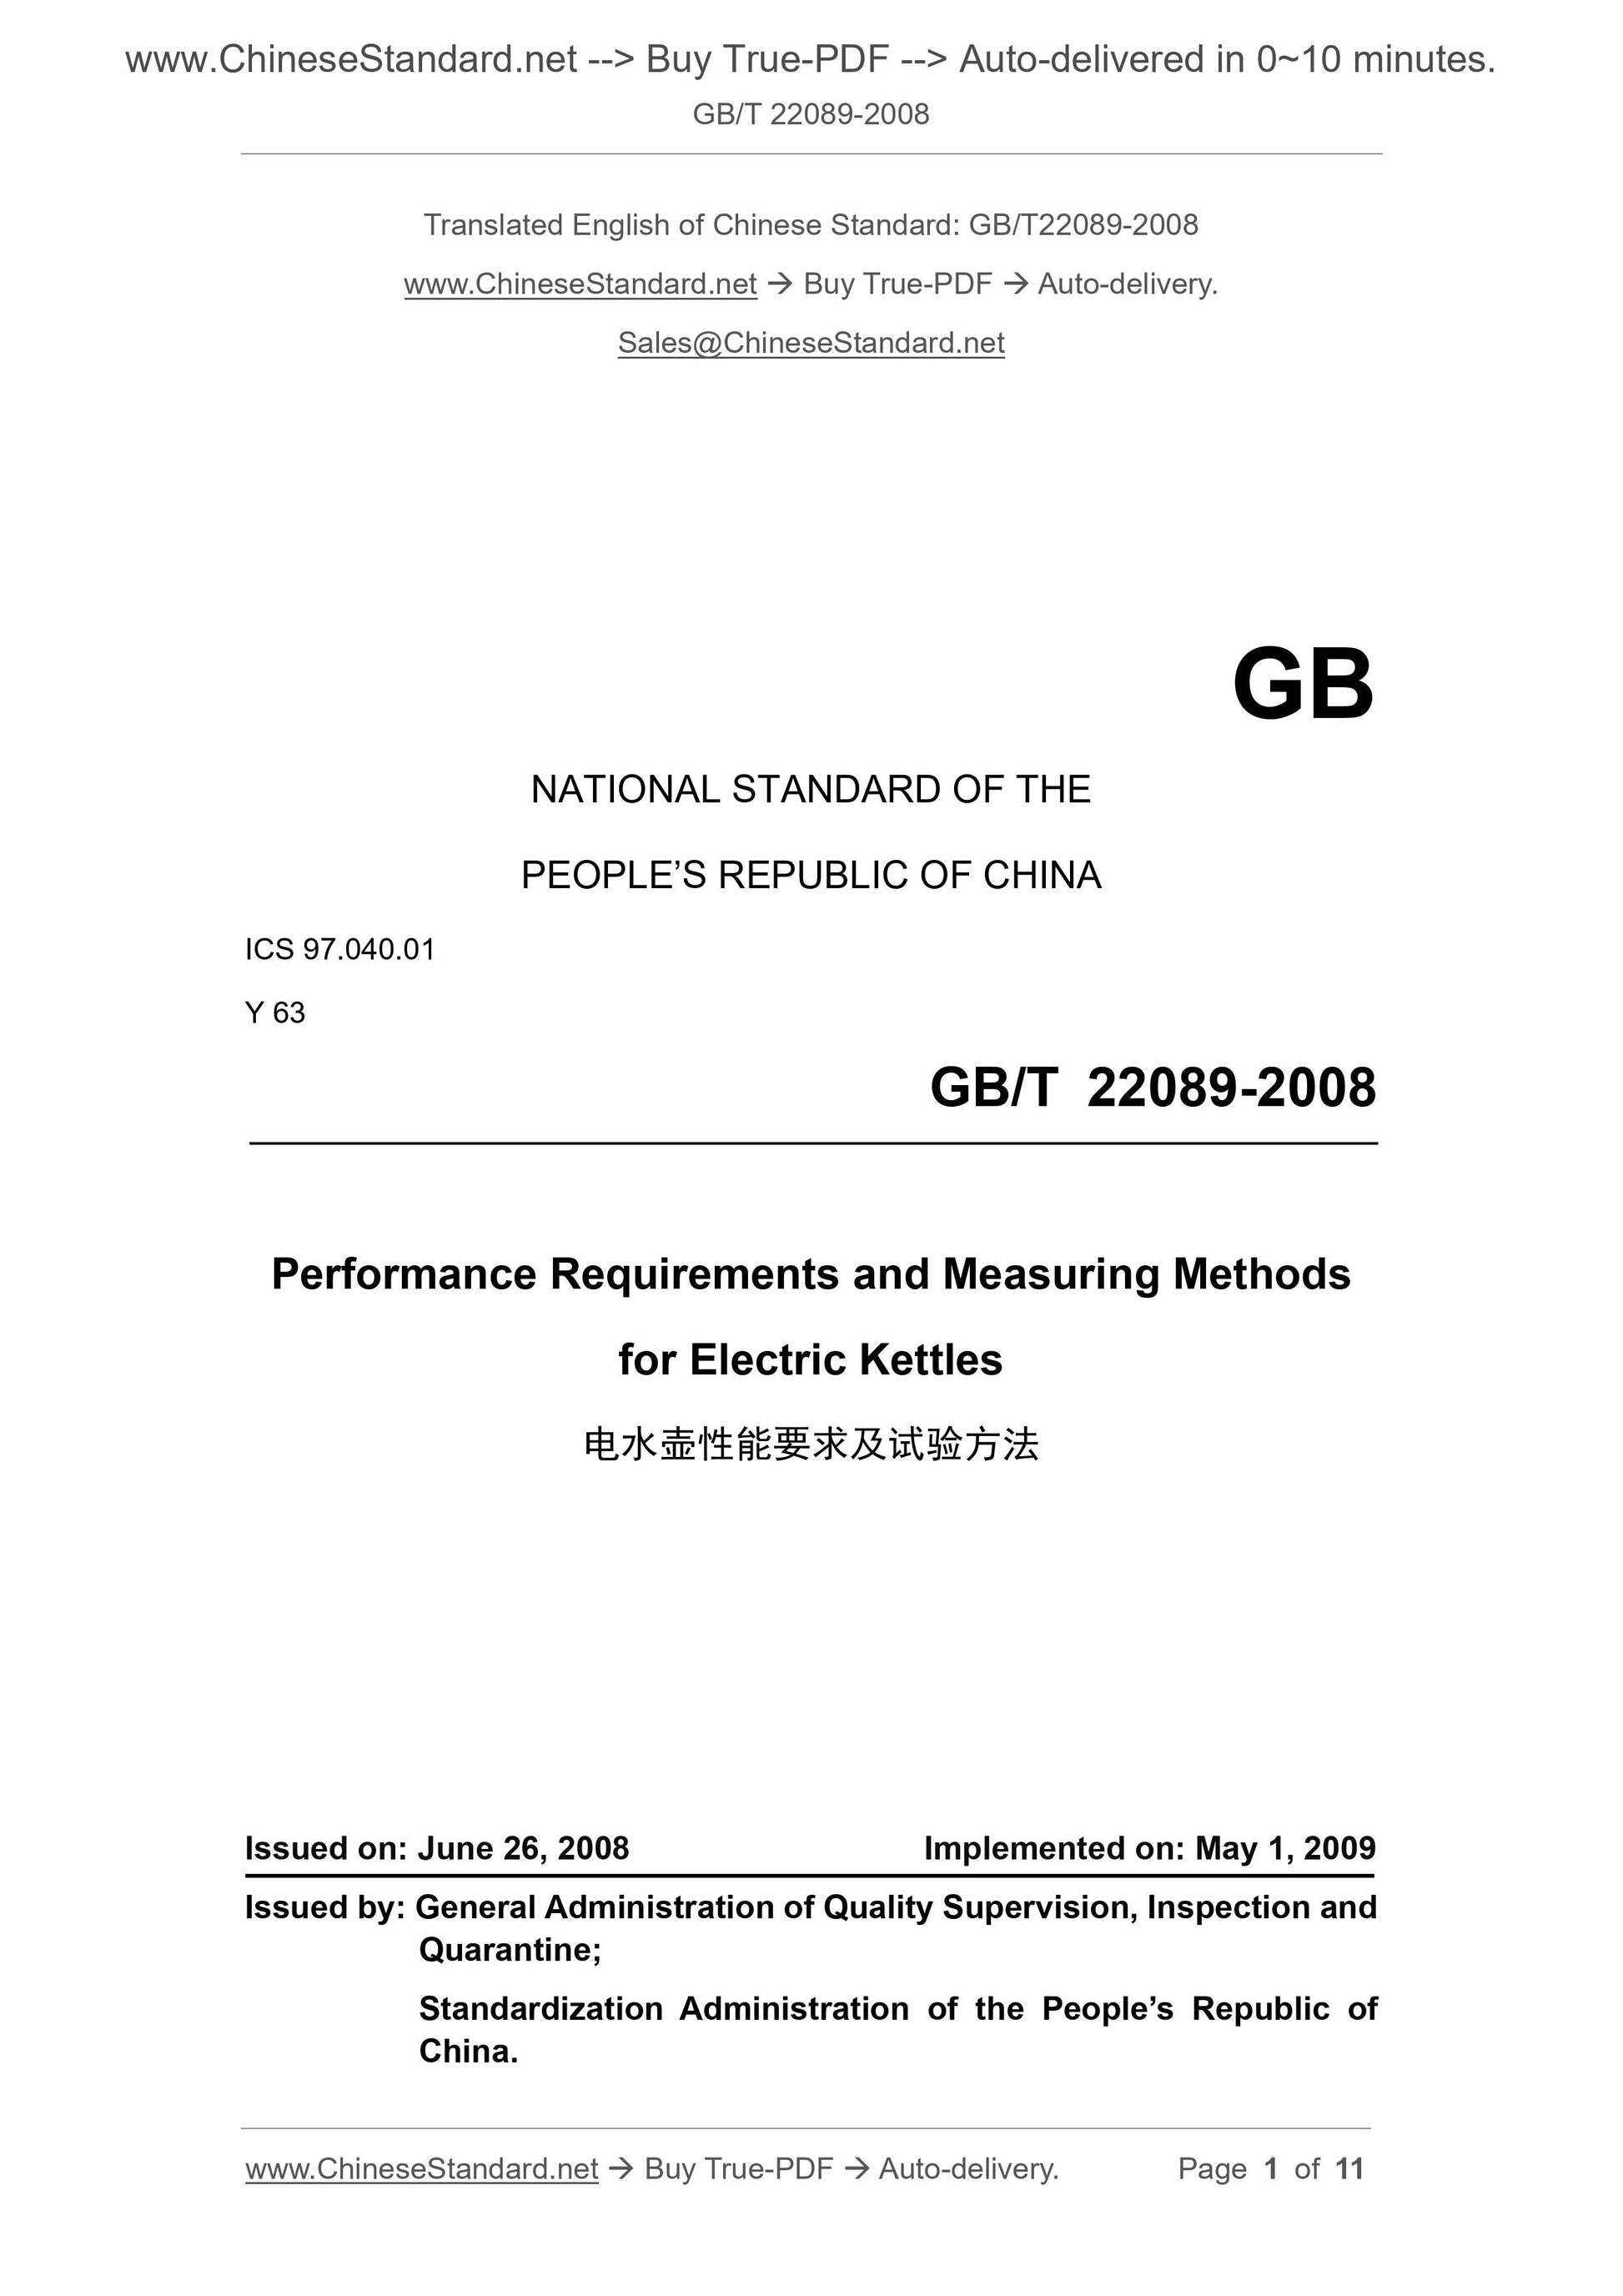 GB/T 22089-2008 Page 1